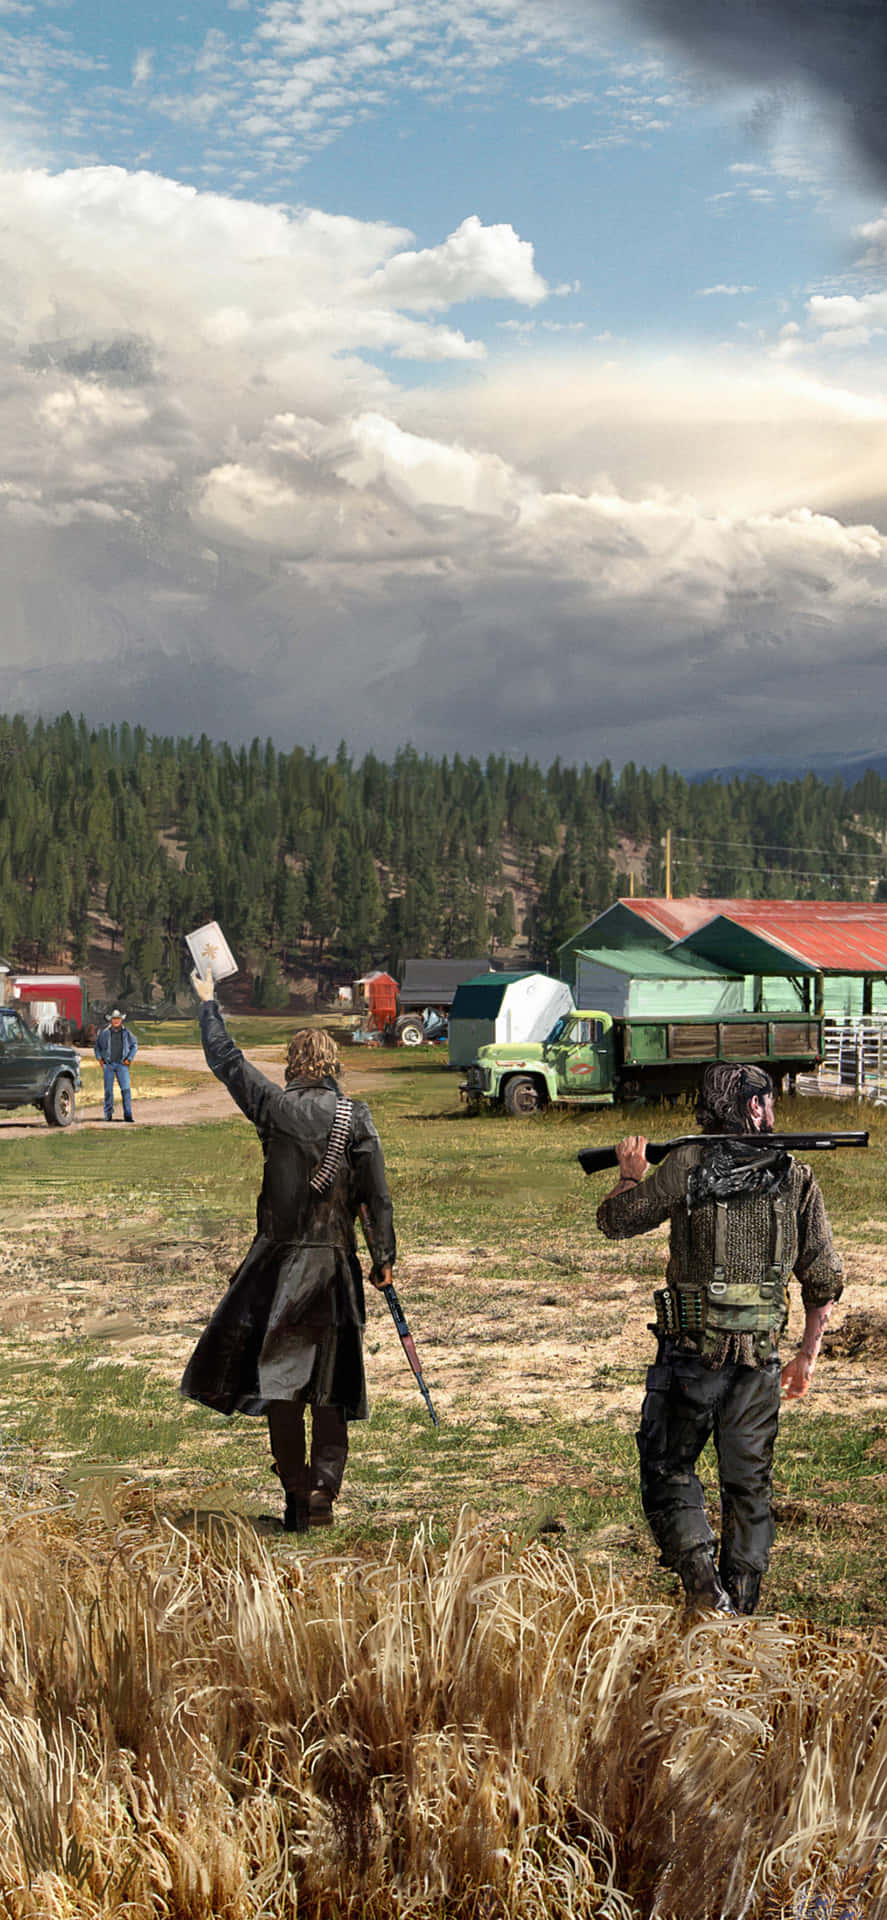 Enjoy the immersive experience of playing Far Cry 5 on Iphone Xs